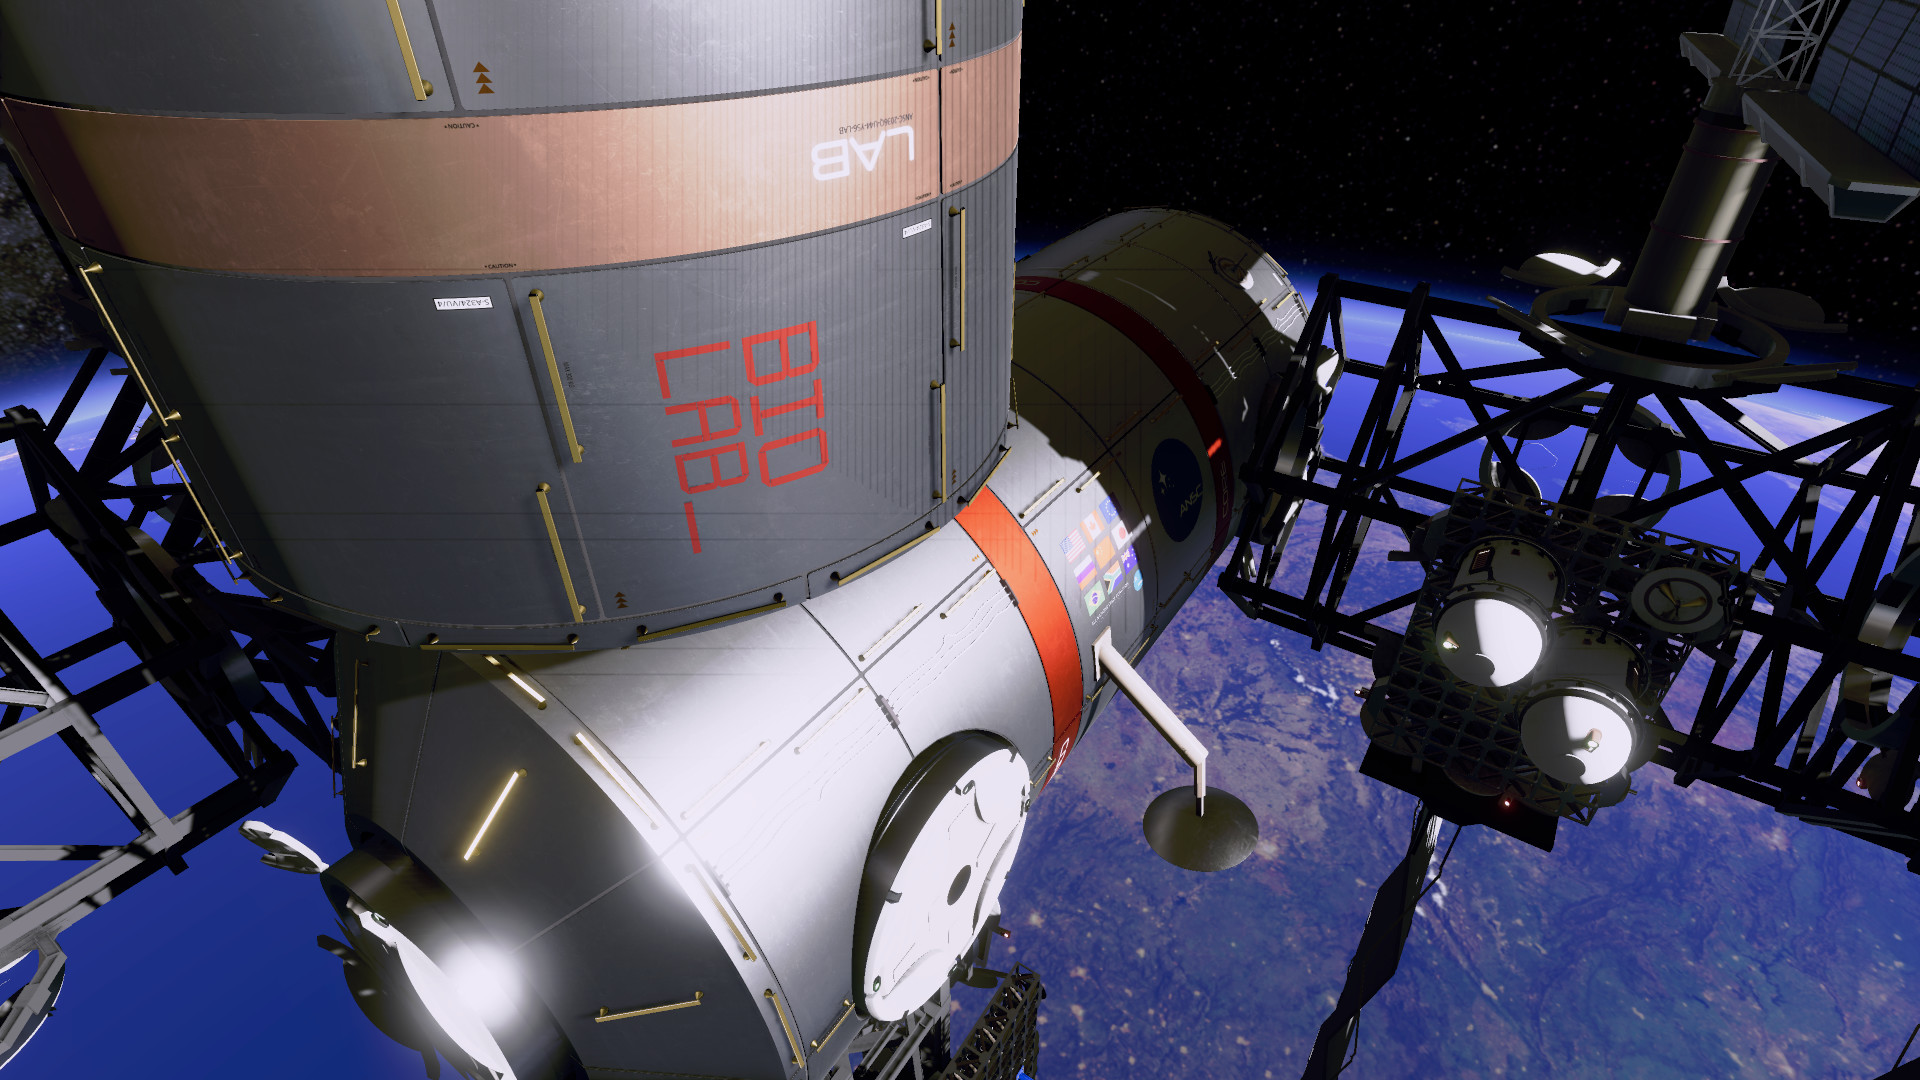 Stable Orbit - Build your own space station screenshot